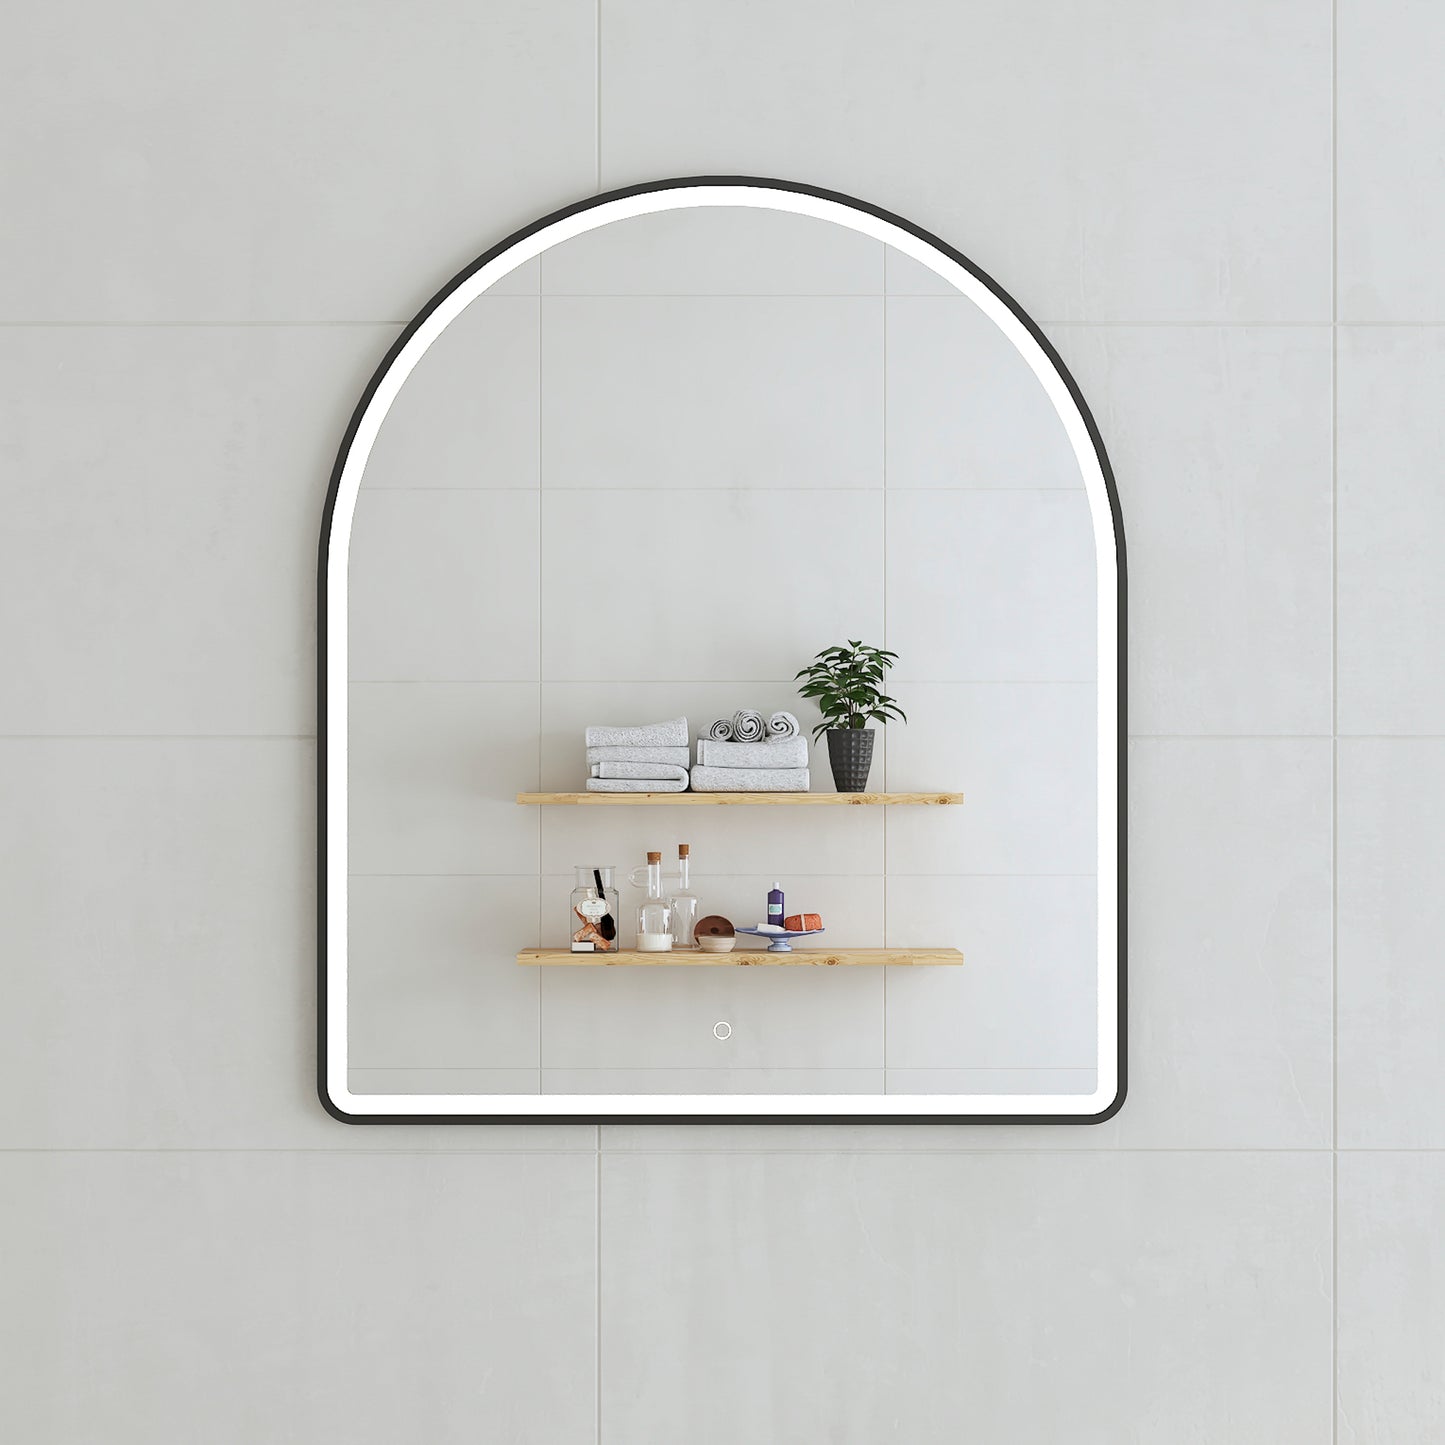 Arco Arch 850mm x 1000mm Frontlit LED Framed Mirror in Matte Black with Demister